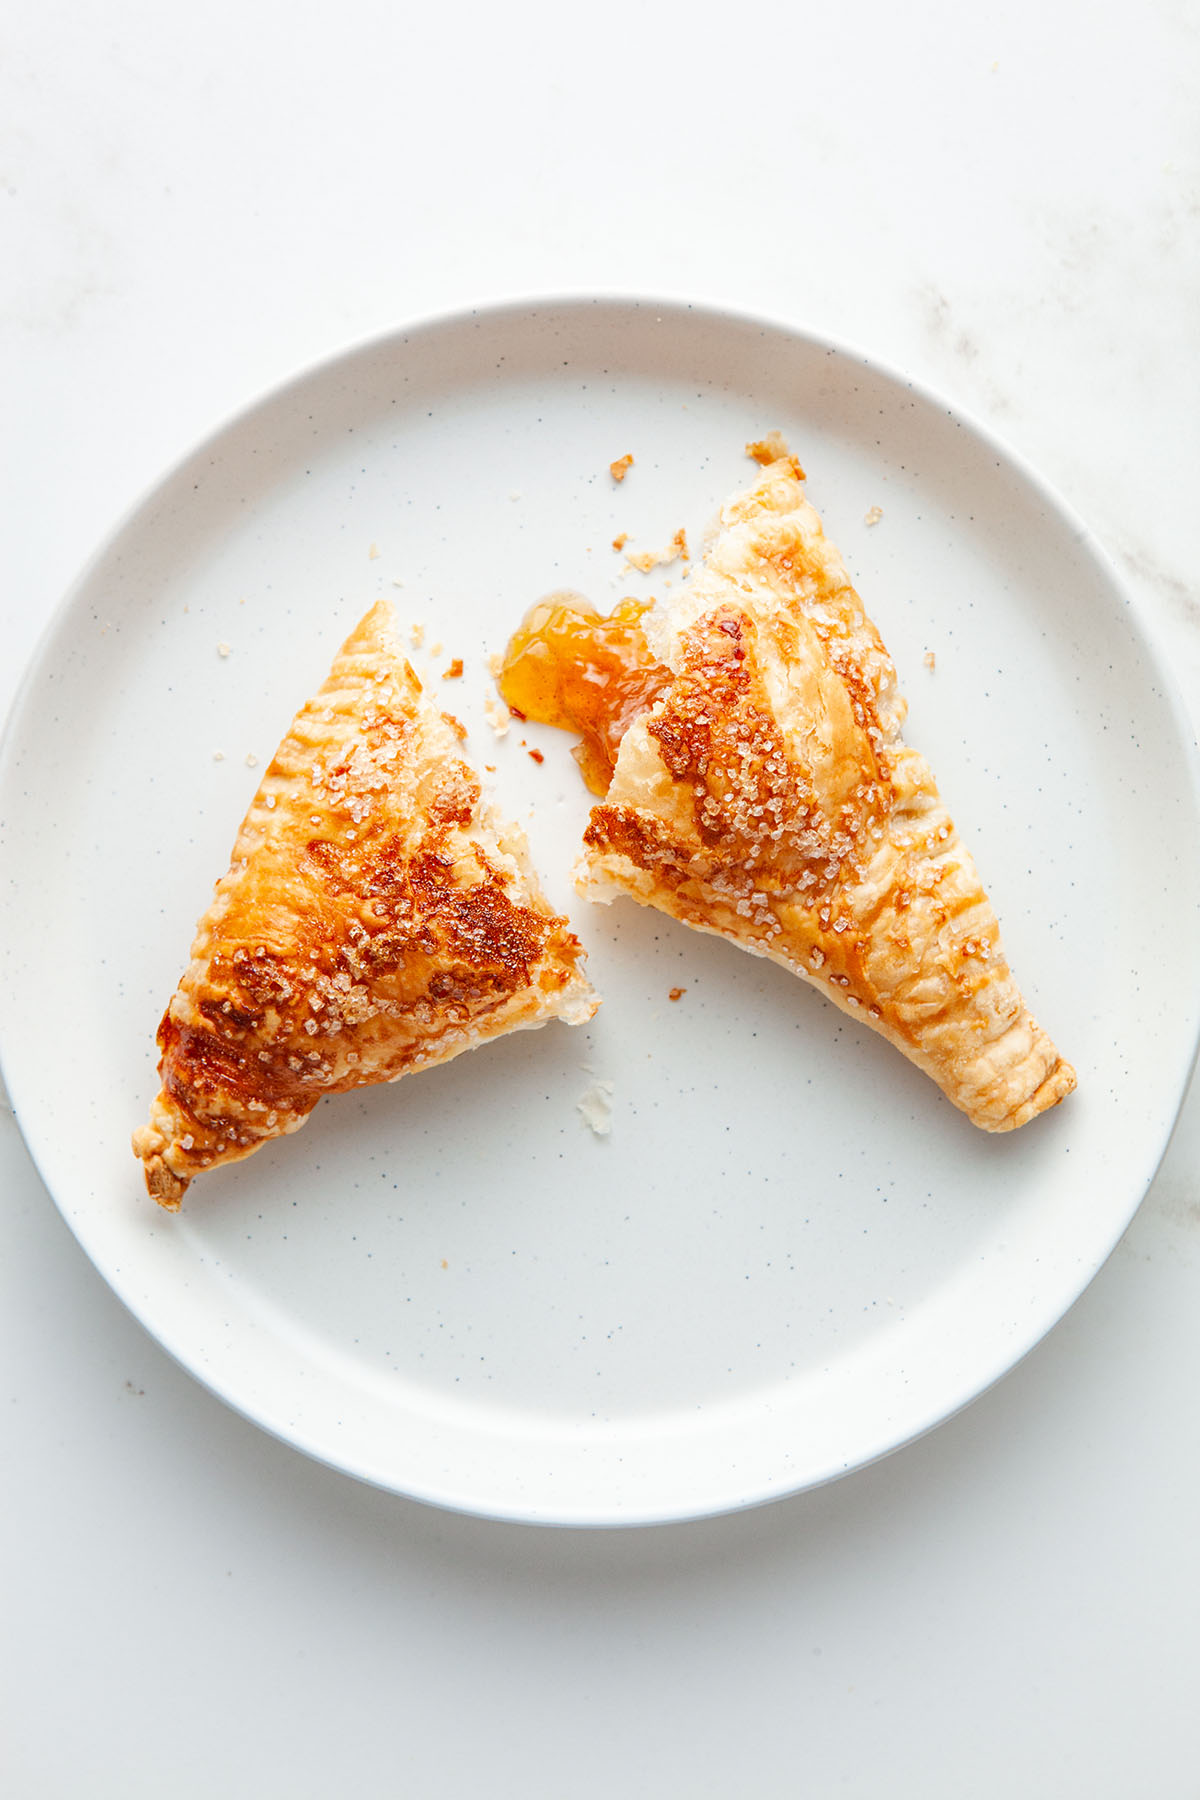 A puff pastry turnover split in half on a plate with jam oozing out.